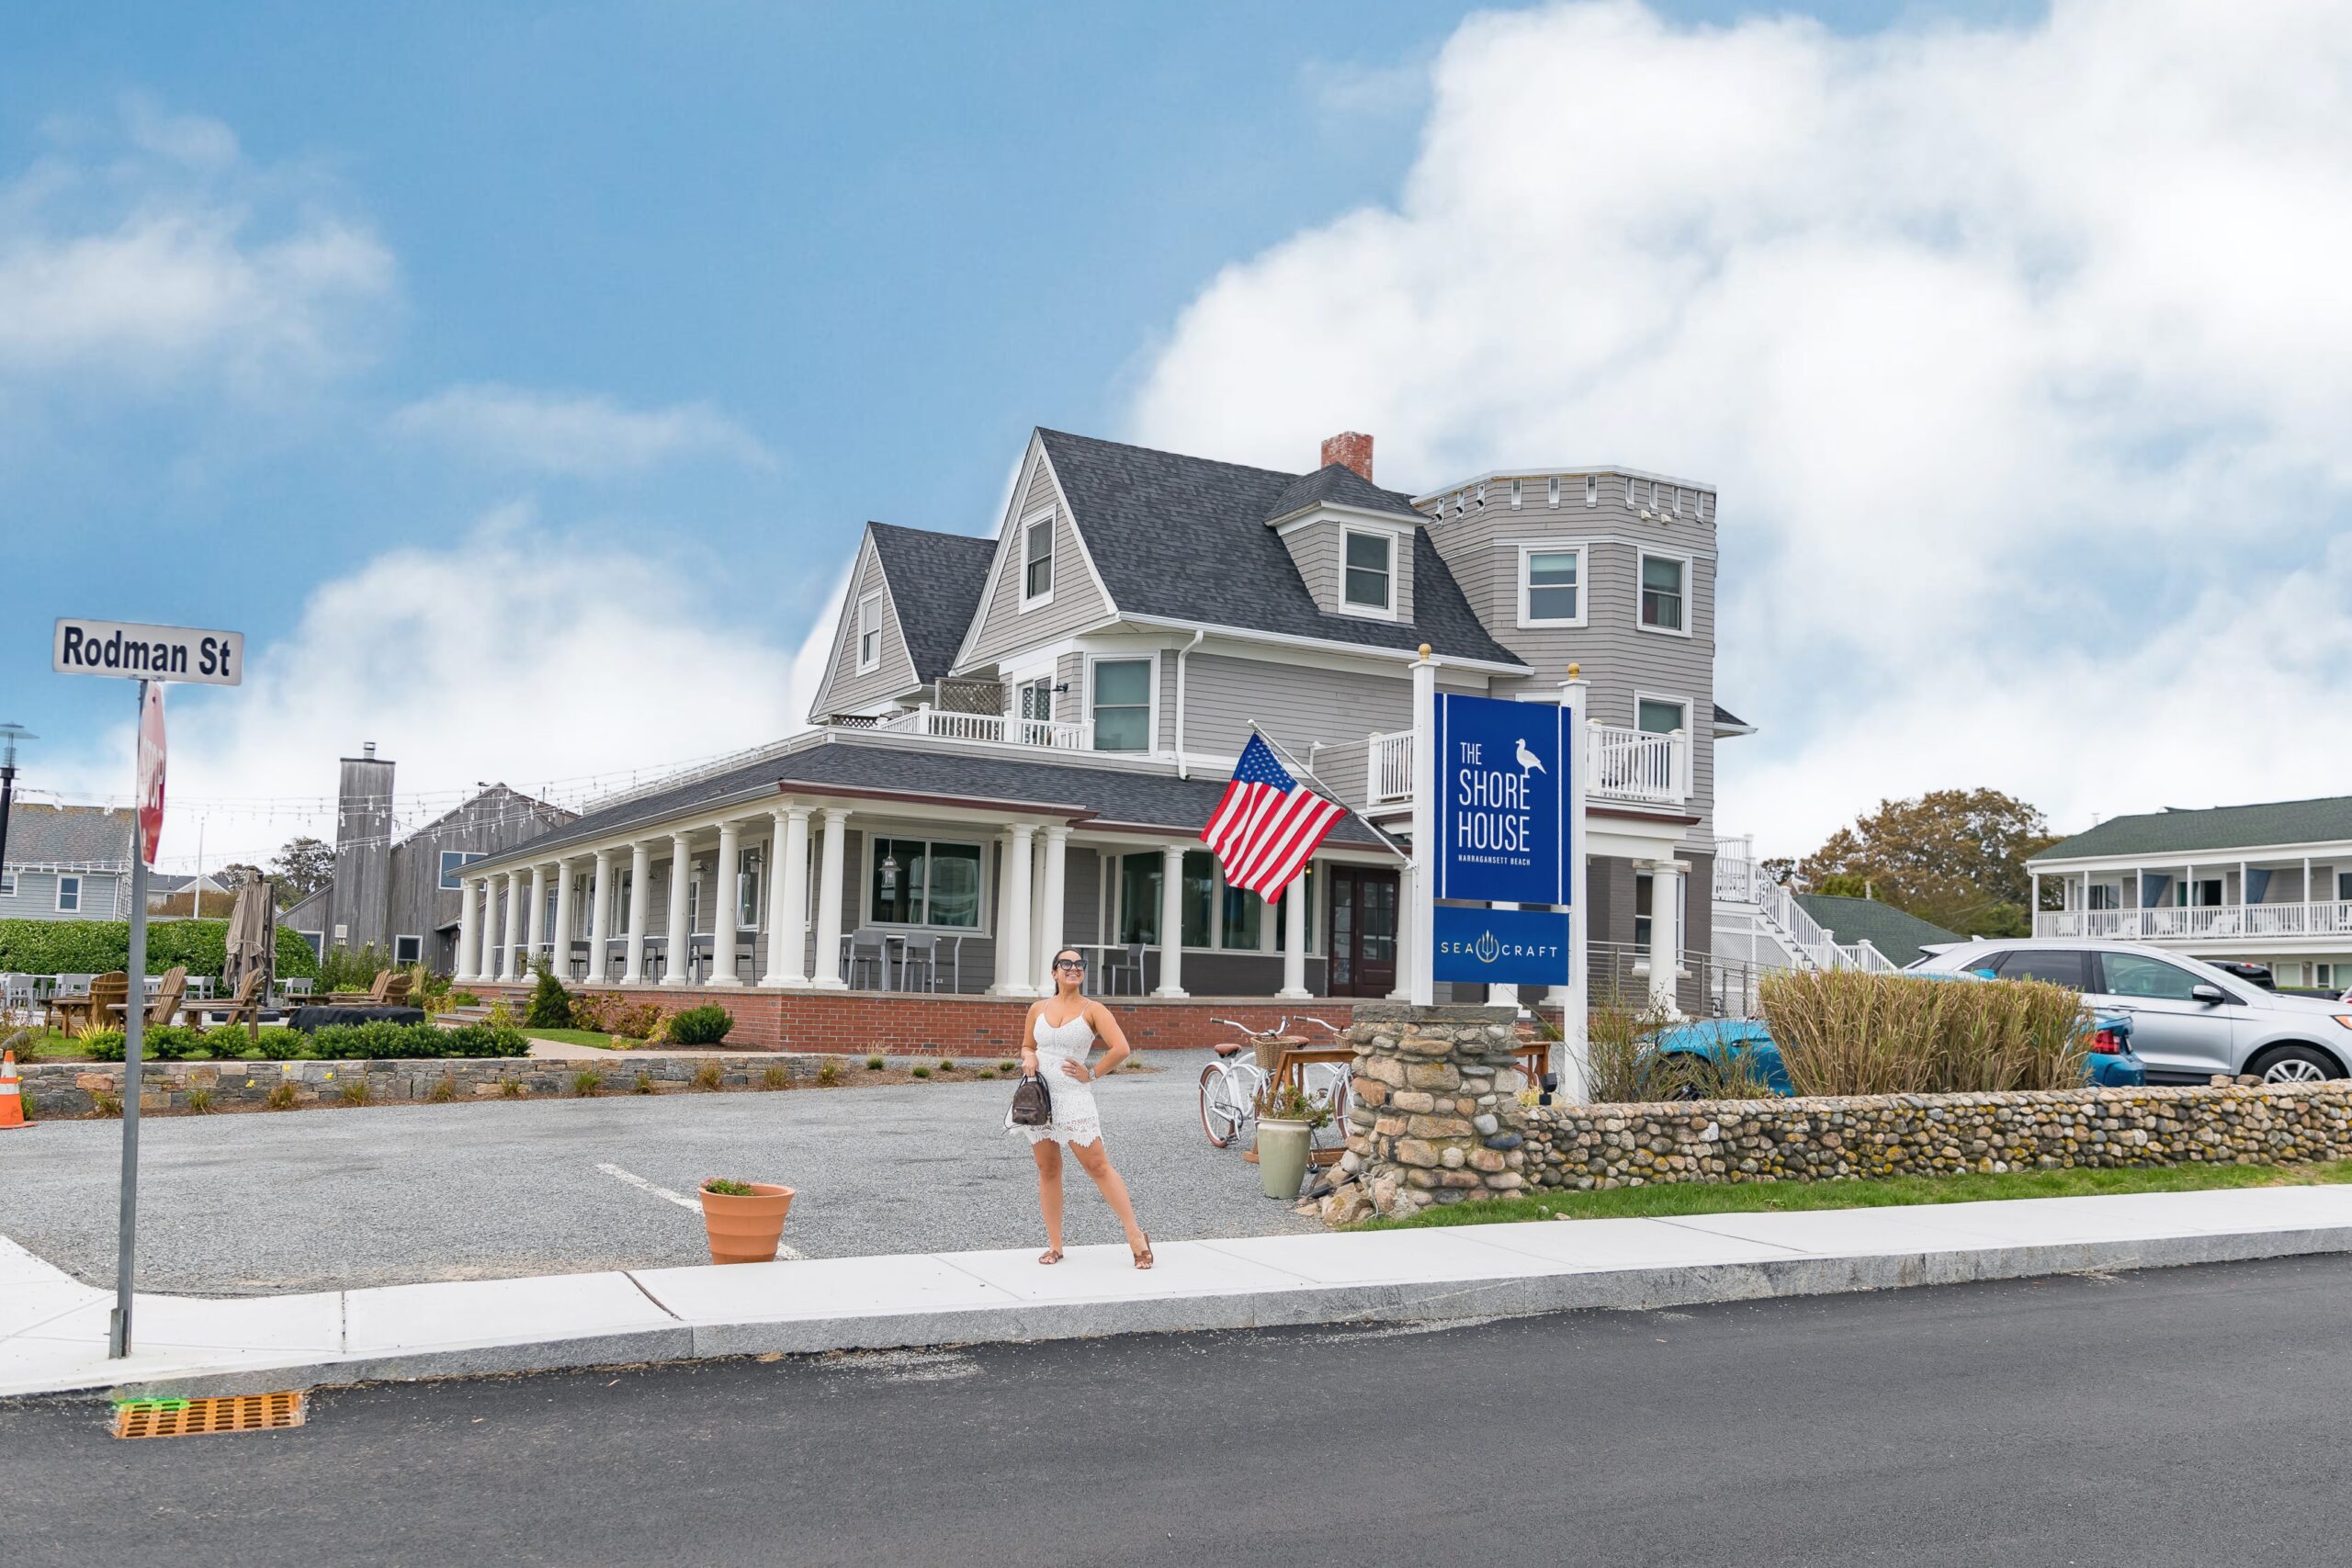 3 Reasons to Visit the Shore House This Fall